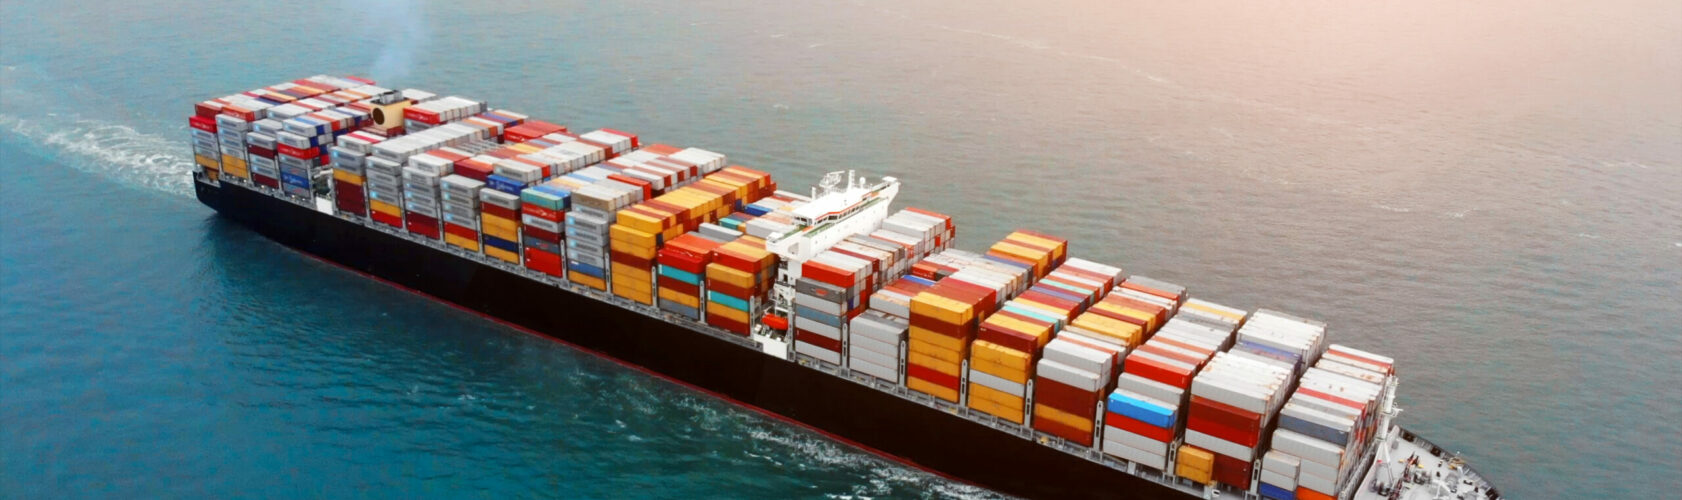 Aerial view of cargo container ship on ocean.